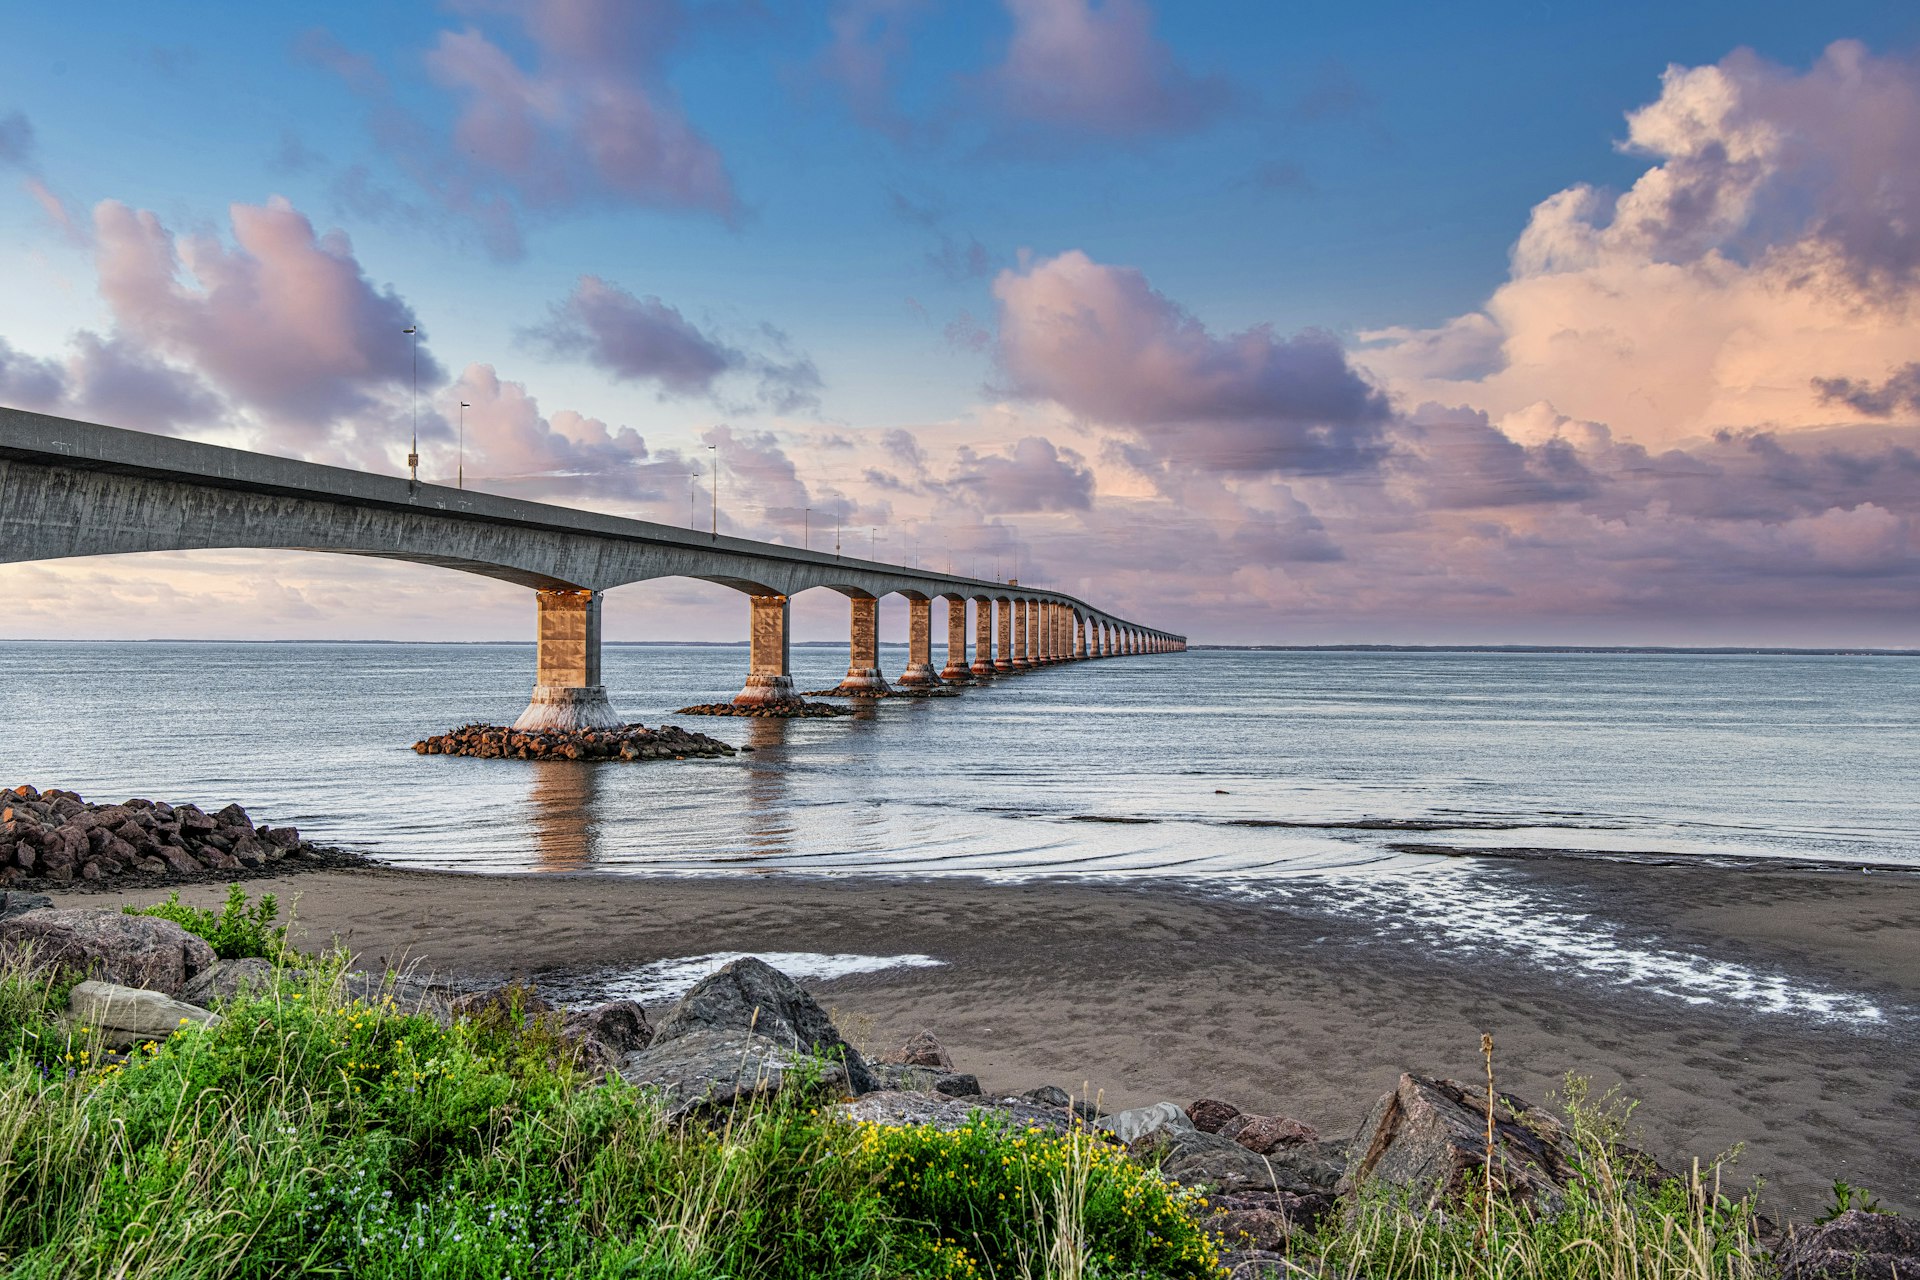 A long, narrow road bridge runs from the shoreline across the sea and stretches into the distance beyond the horizon